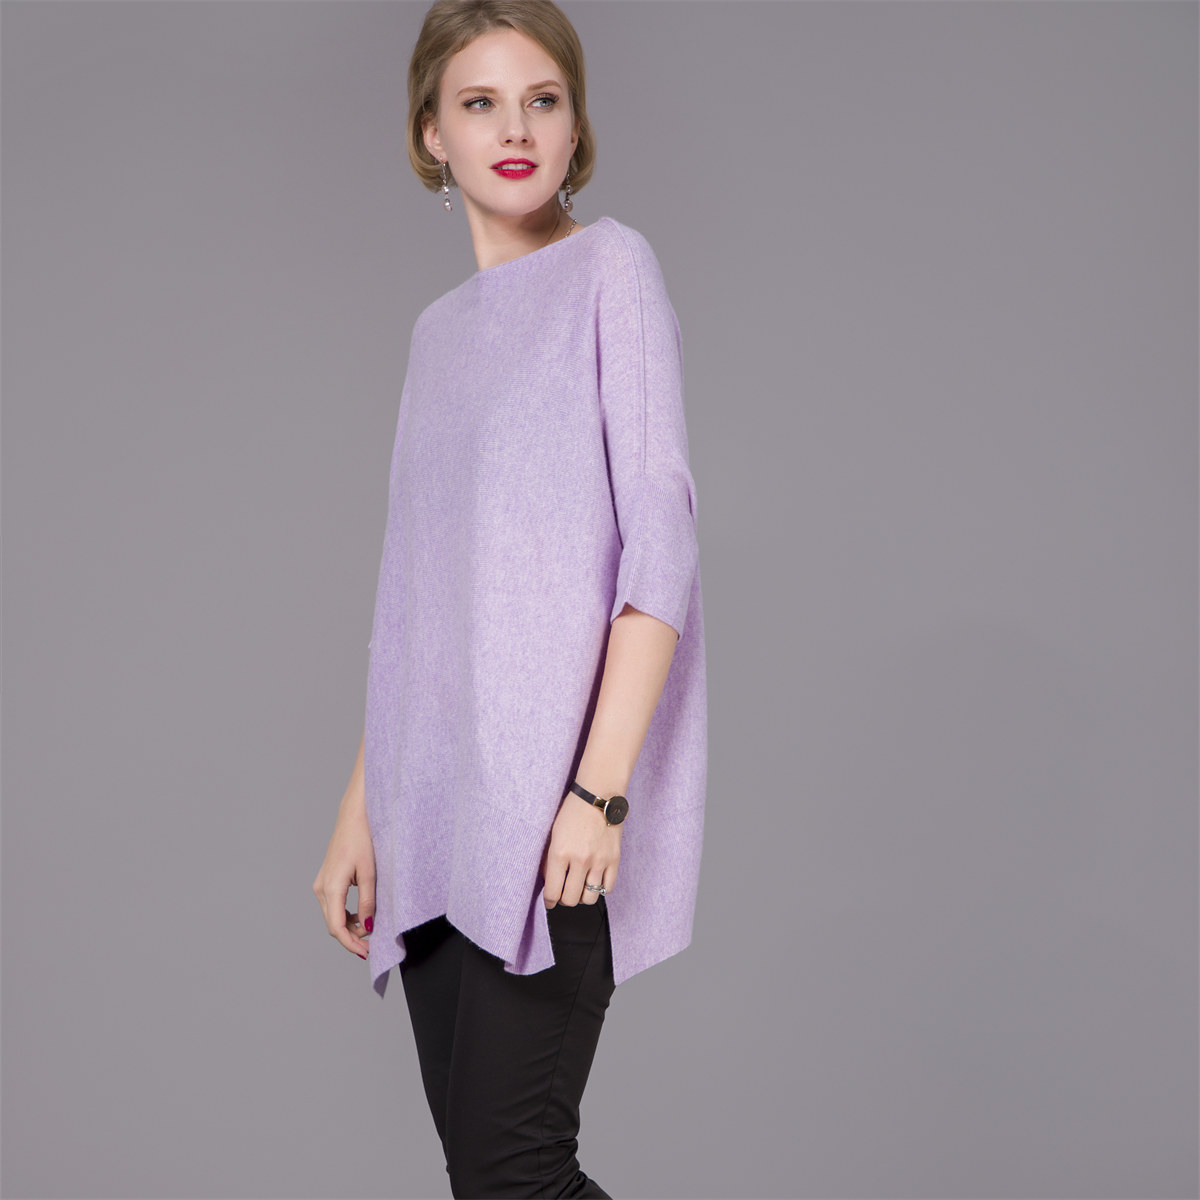 Women’s pure cashmere sweater fashion style for summer